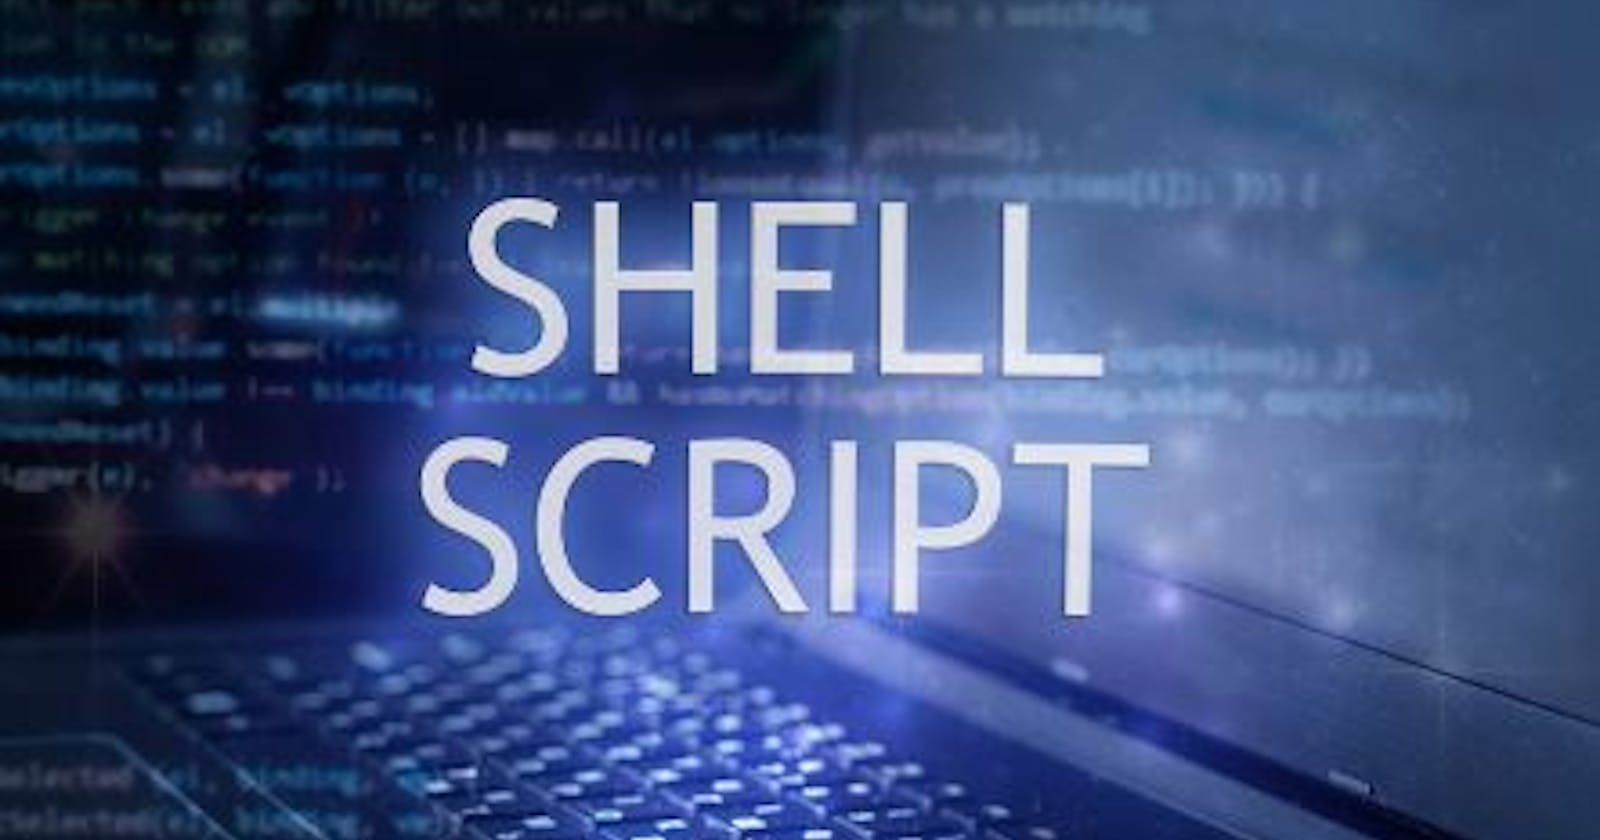 Shell scripting - usage of AWS resources